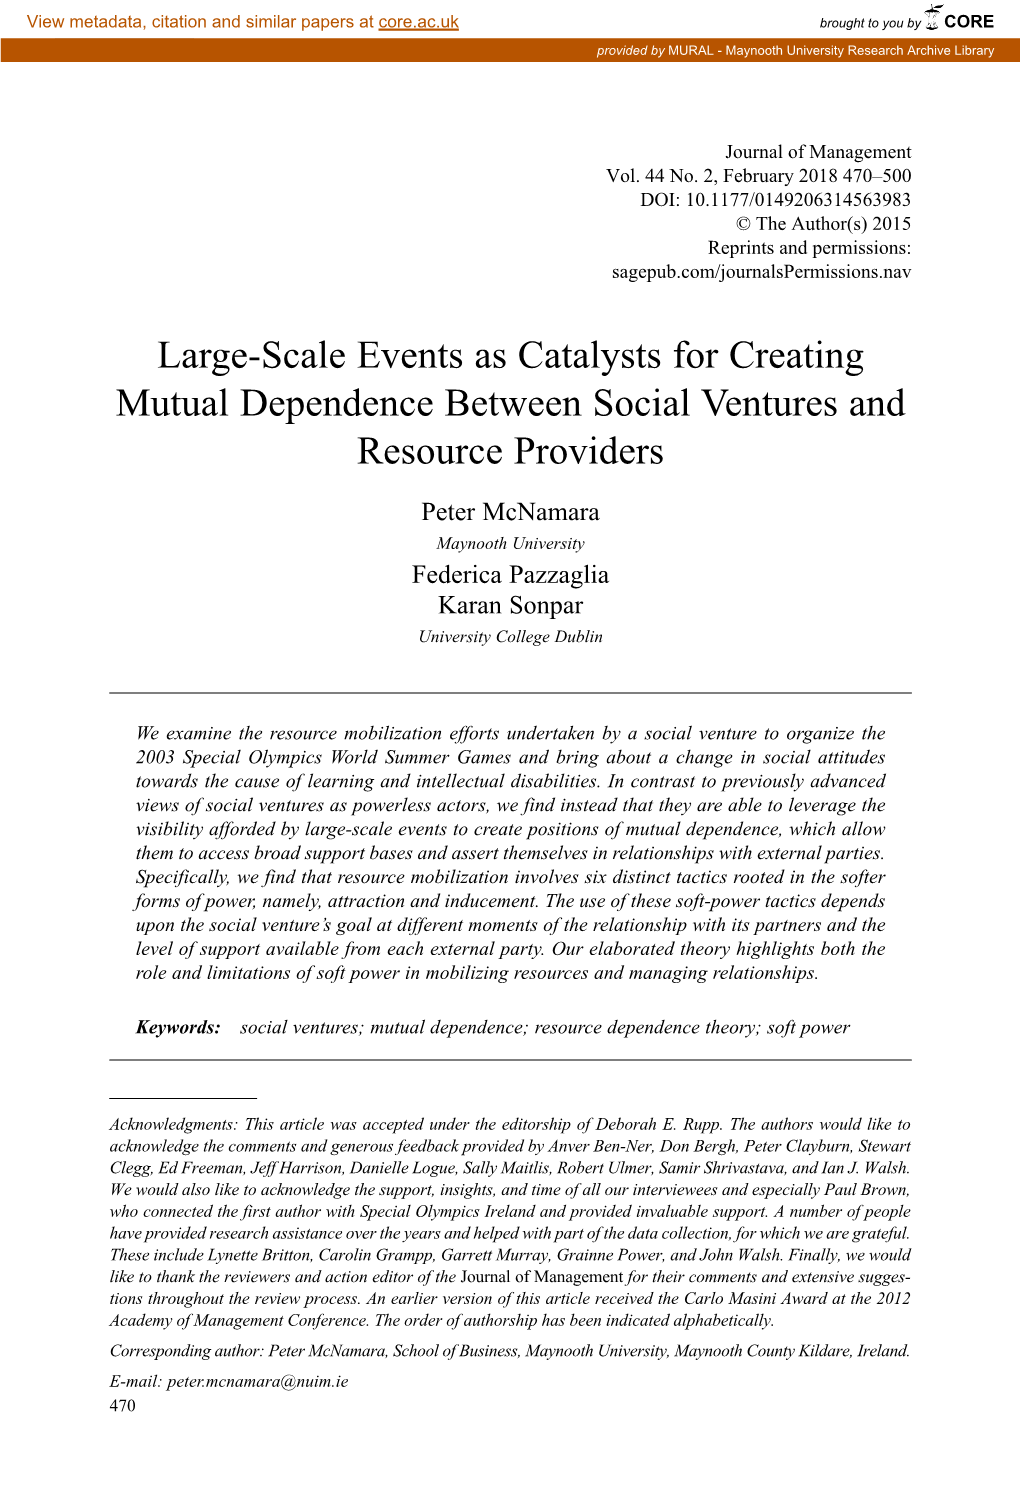 Large-Scale Events As Catalysts for Creating Mutual Dependence Between Social Ventures and Resource Providers